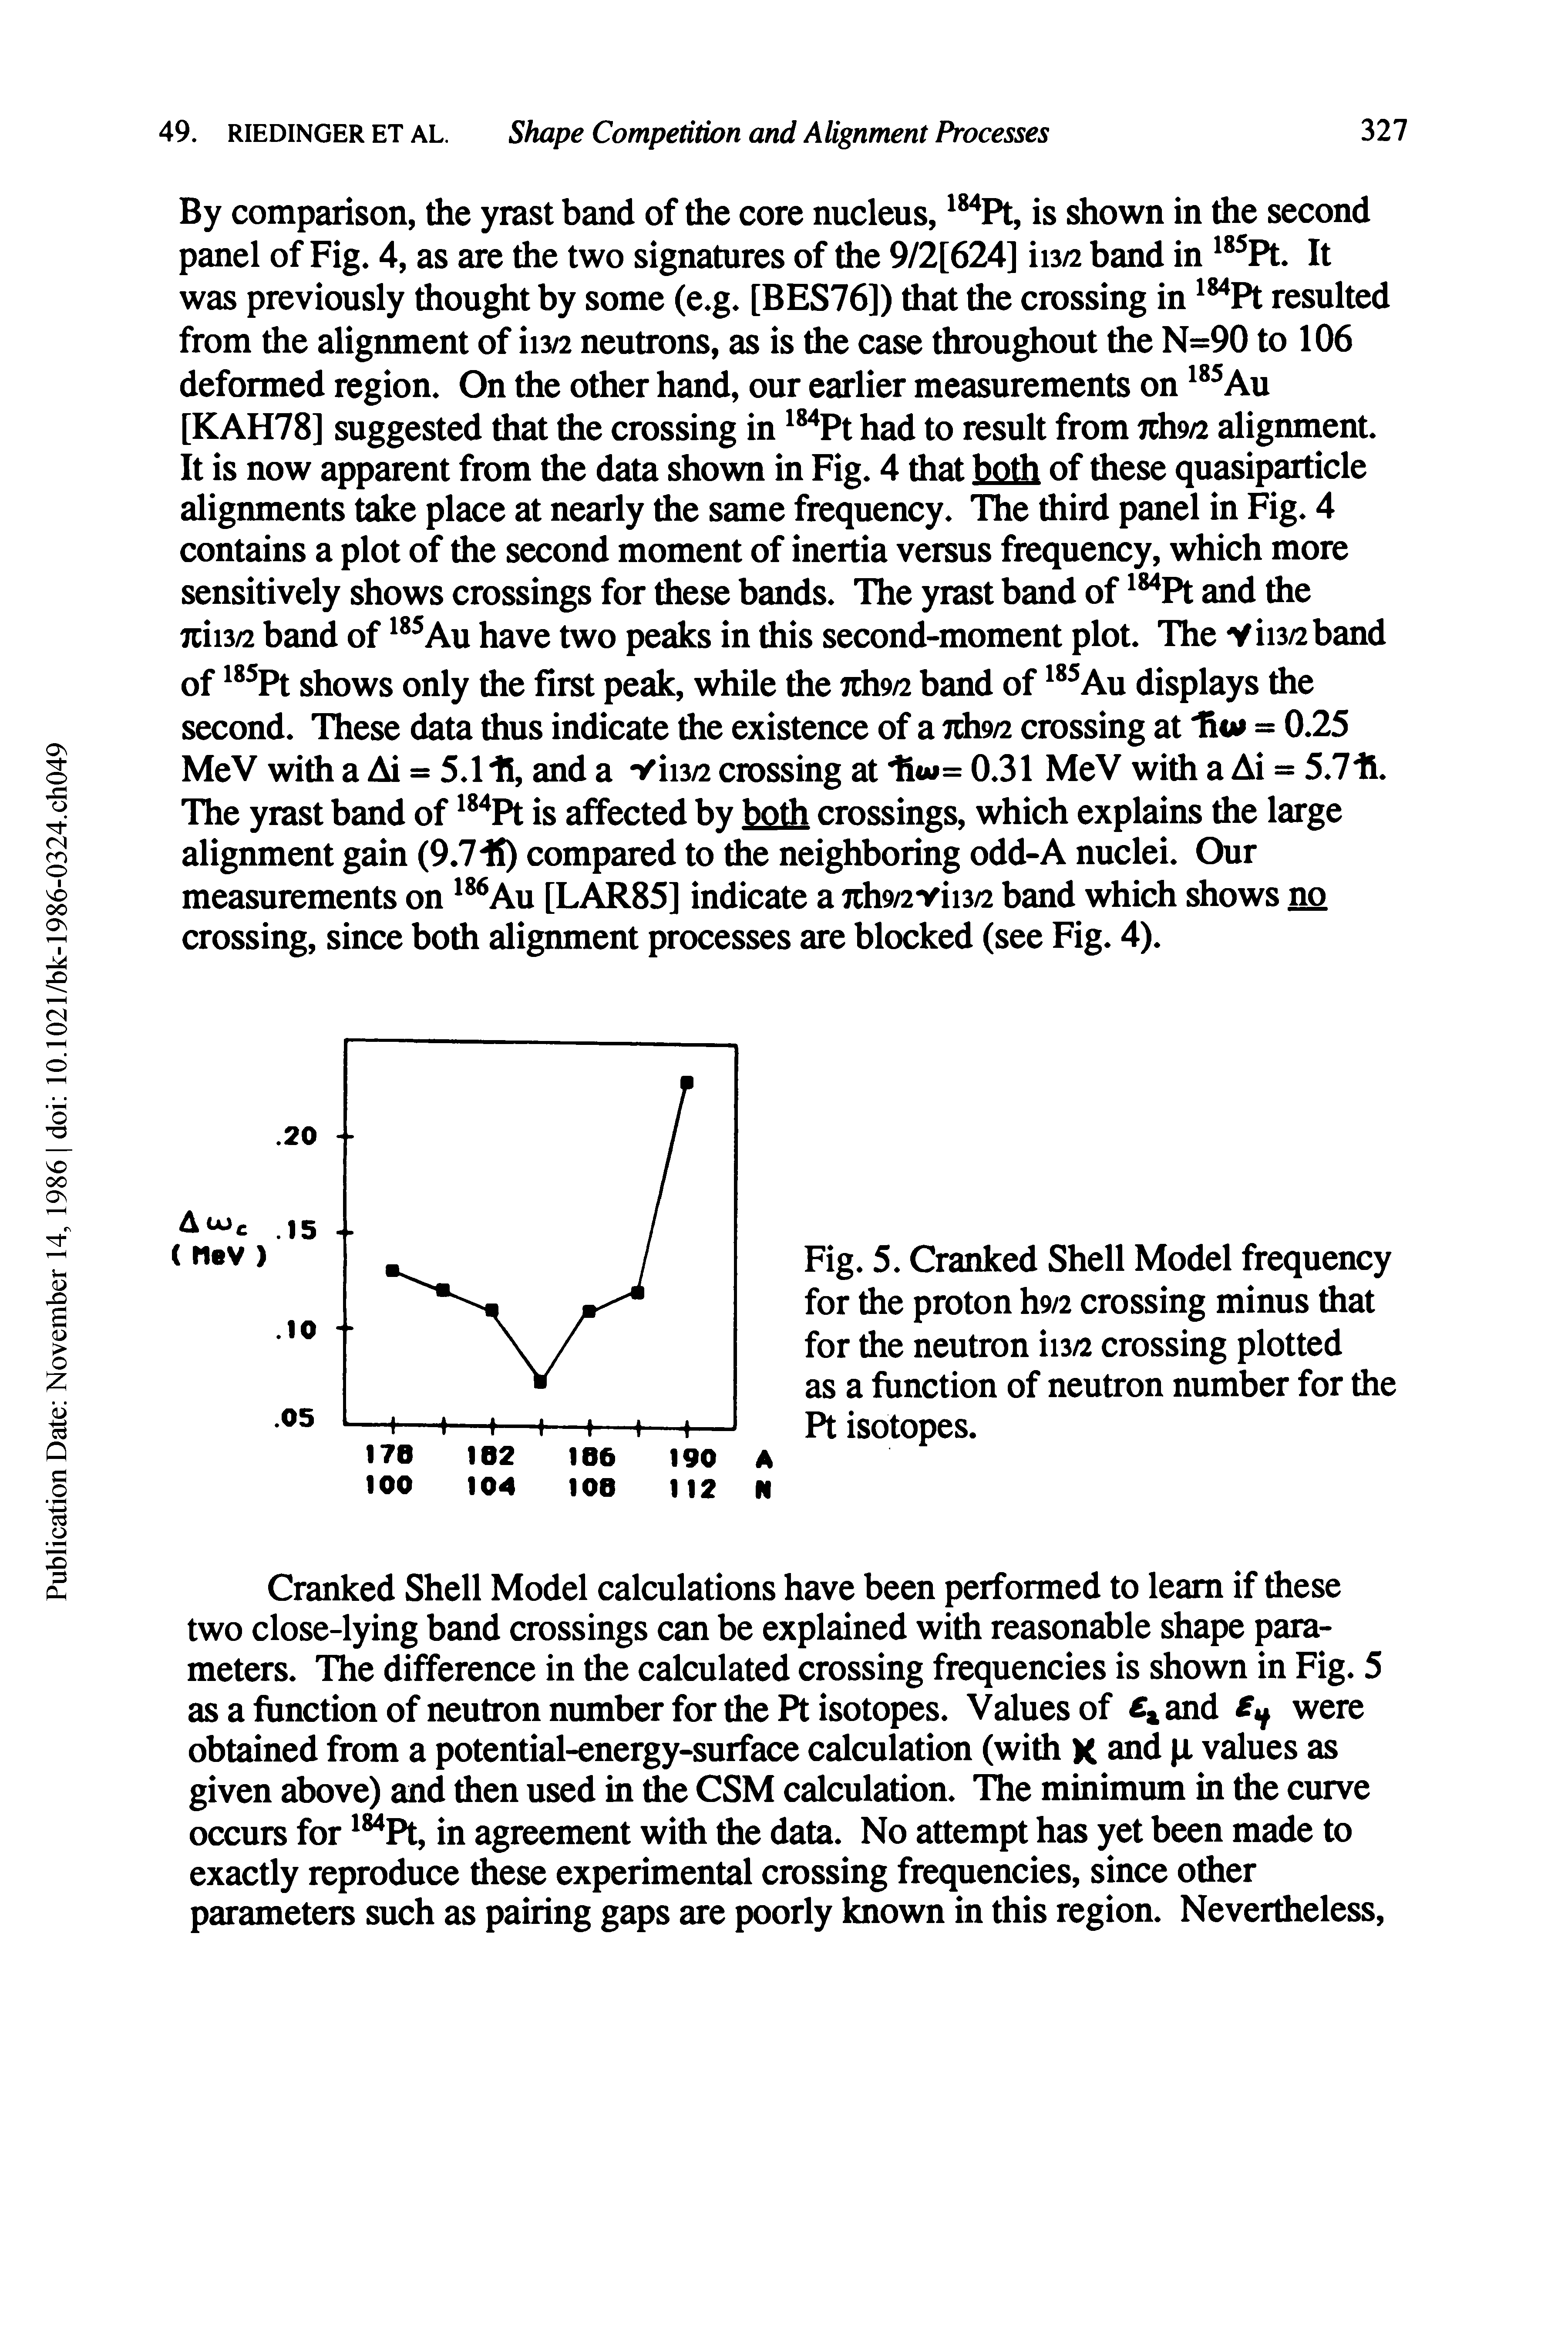 Fig. 5. Cranked Shell Model frequency for the proton 1m crossing minus that for the neutron an crossing plotted as a function of neutron number for the Pt isotopes.